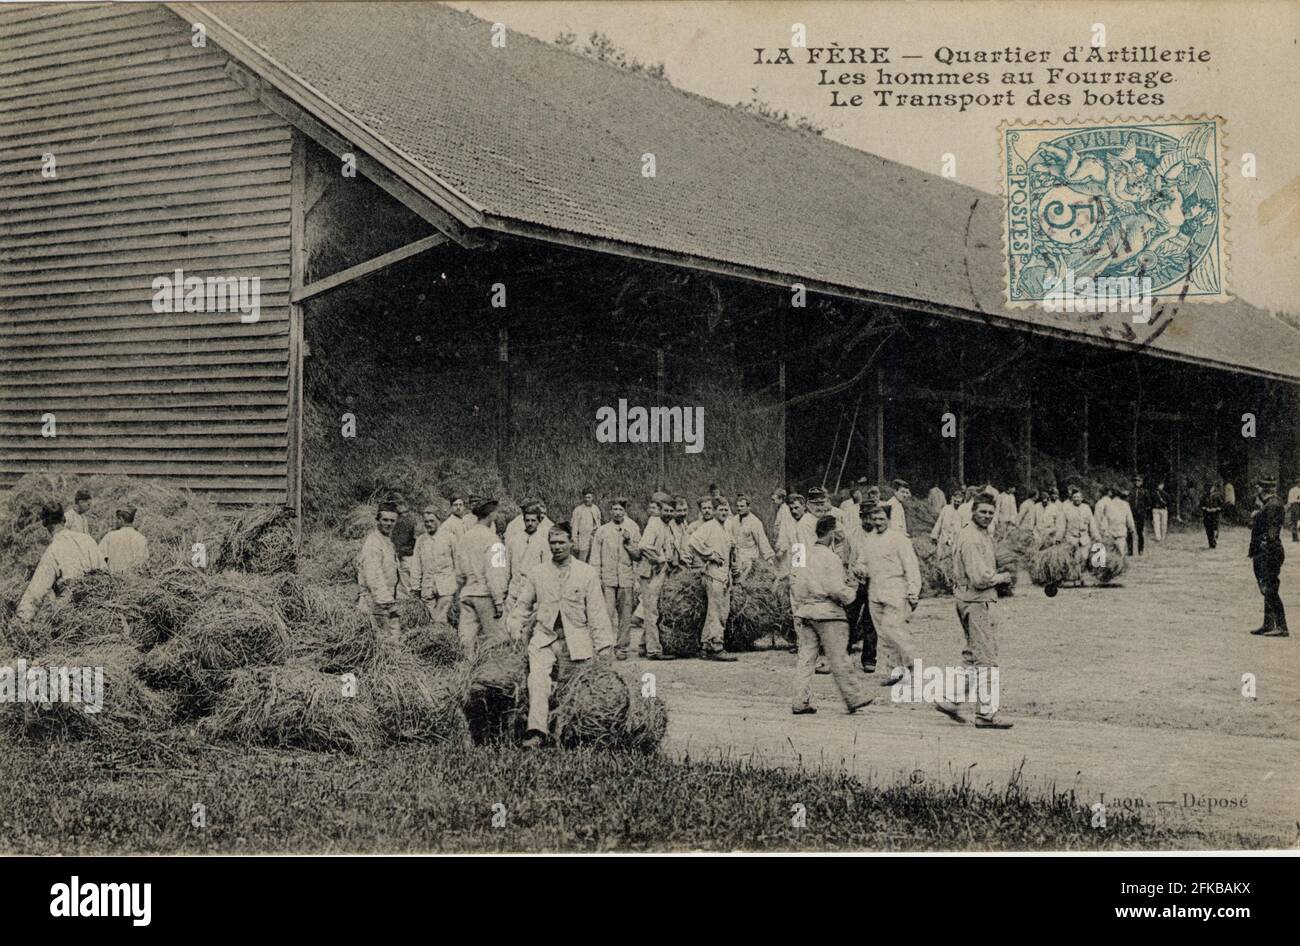 La Fère (Aisne) during the First World War. Artillery quarter. Men feeding cattle (fodder) and transport of boots. French department: 02 - Aisne Postcard beginning of 20th century Stock Photo